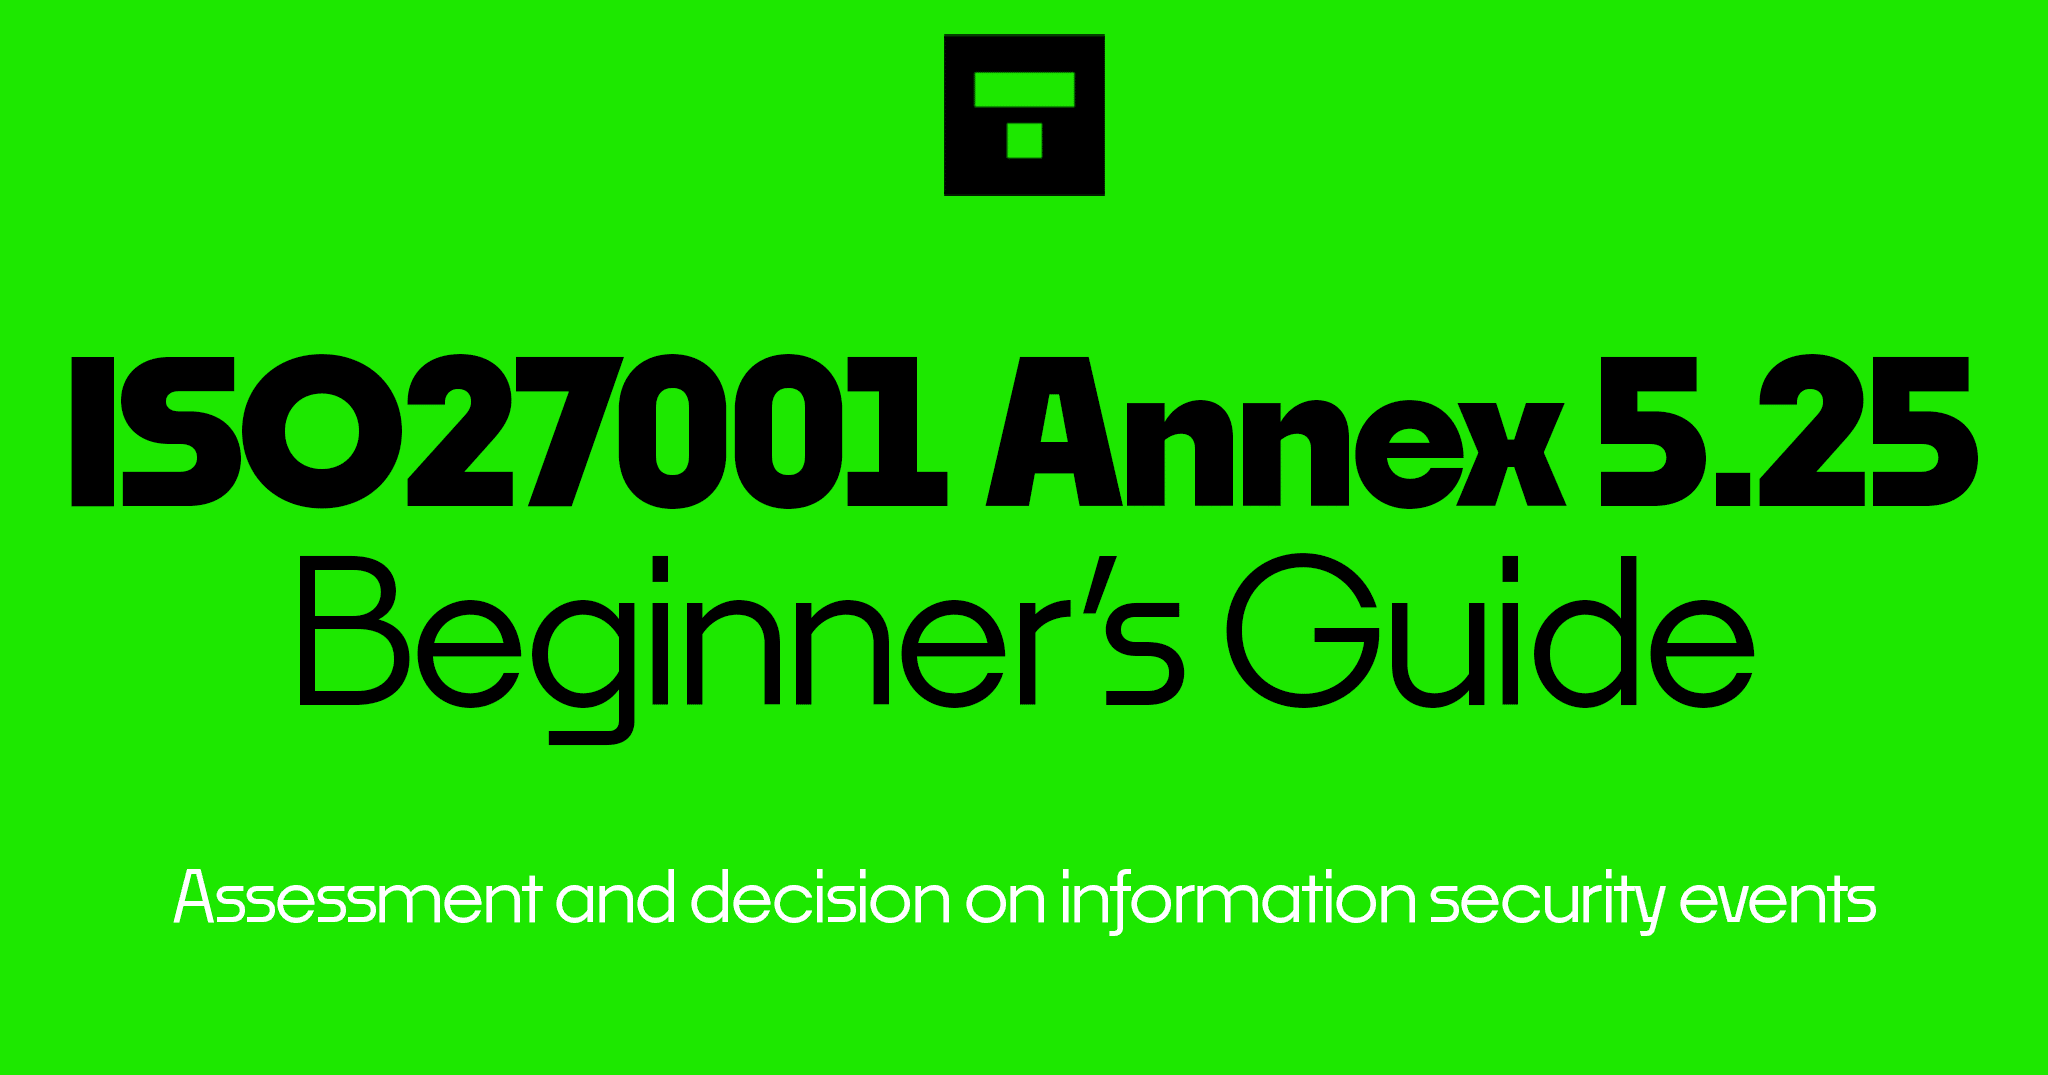 How To Implement ISO 27001 Annex A 5.25 Assessment And Decision On Information Security Events